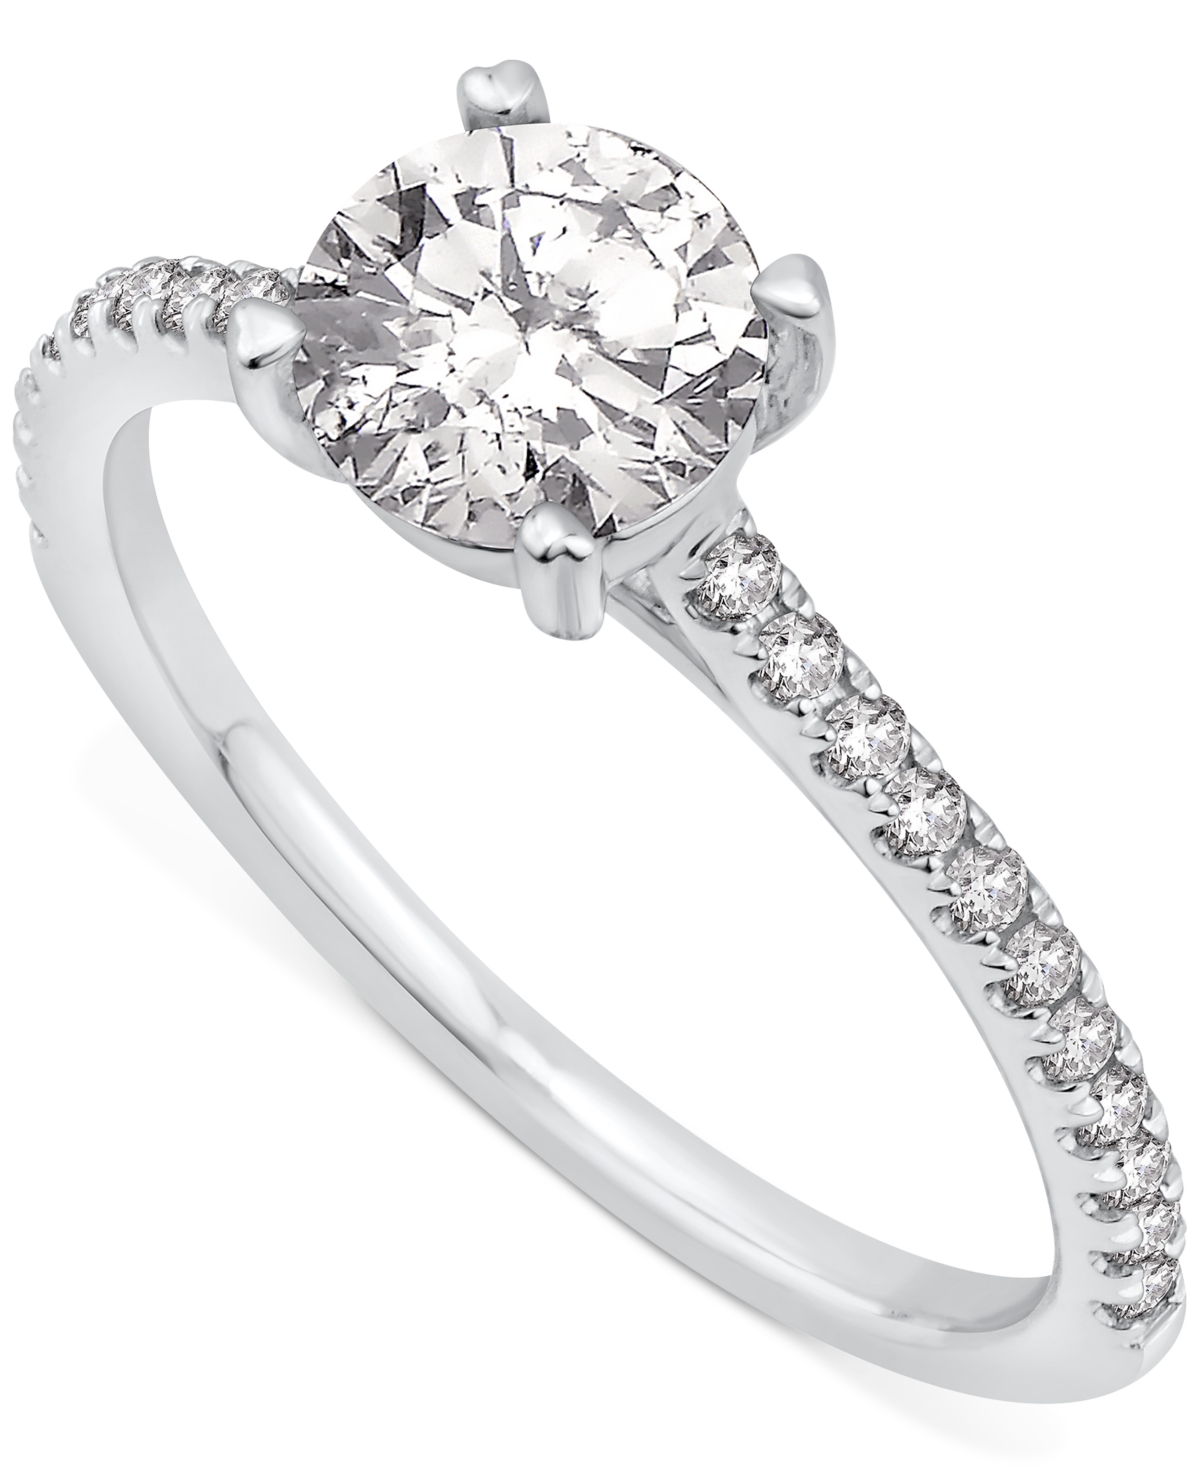 Gia Certified Diamonds Gia Certified Diamond Engagement Ring (1-1/4 ct. t.w.) in 14k White Gold